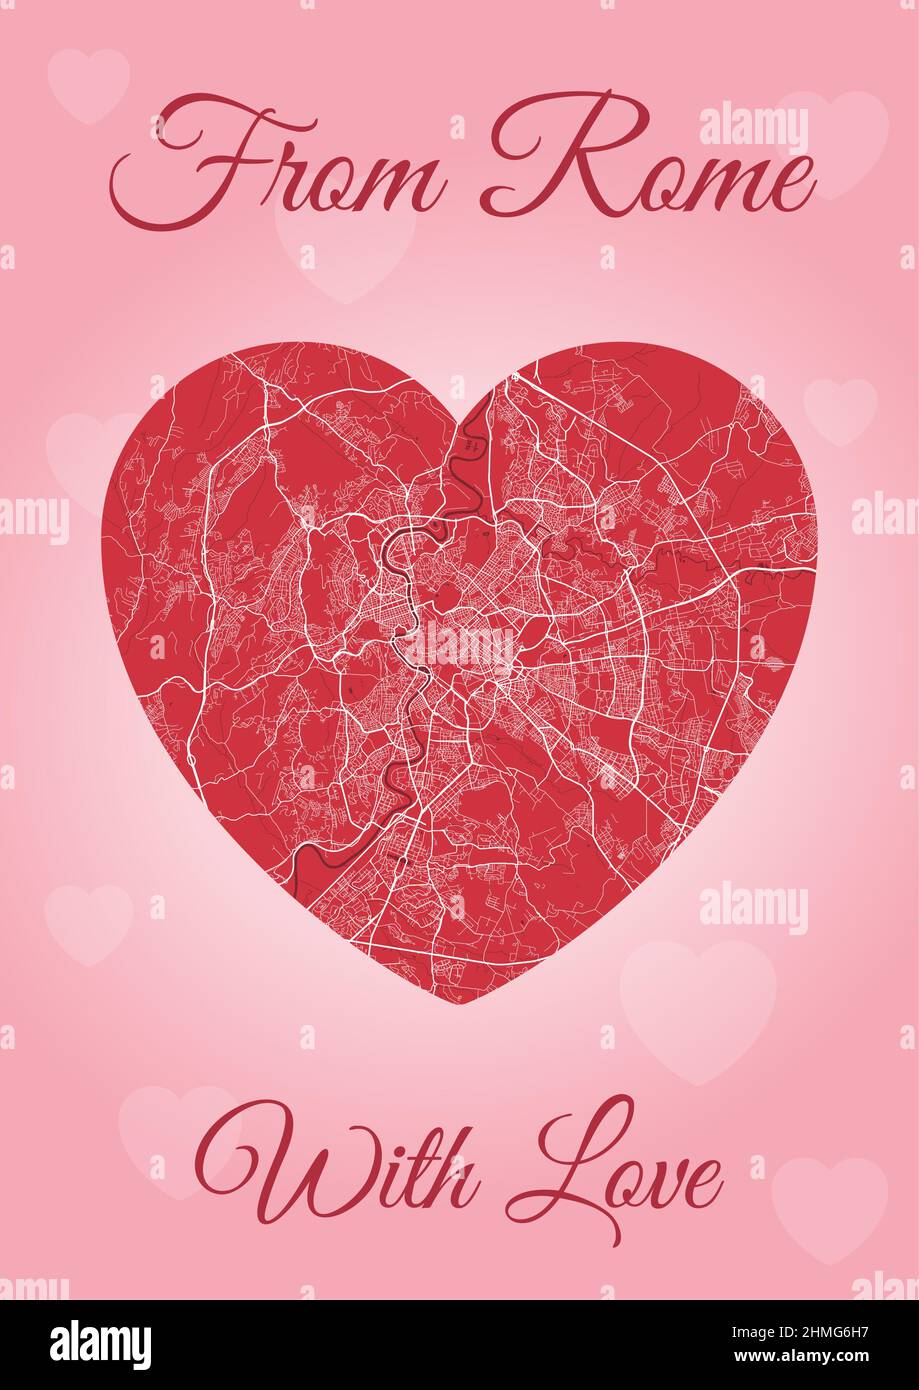 From Rome with love card, city map in heart shape. Vertical A4 Pink and red color vector illustration. Love city travel cityscape. Stock Vector